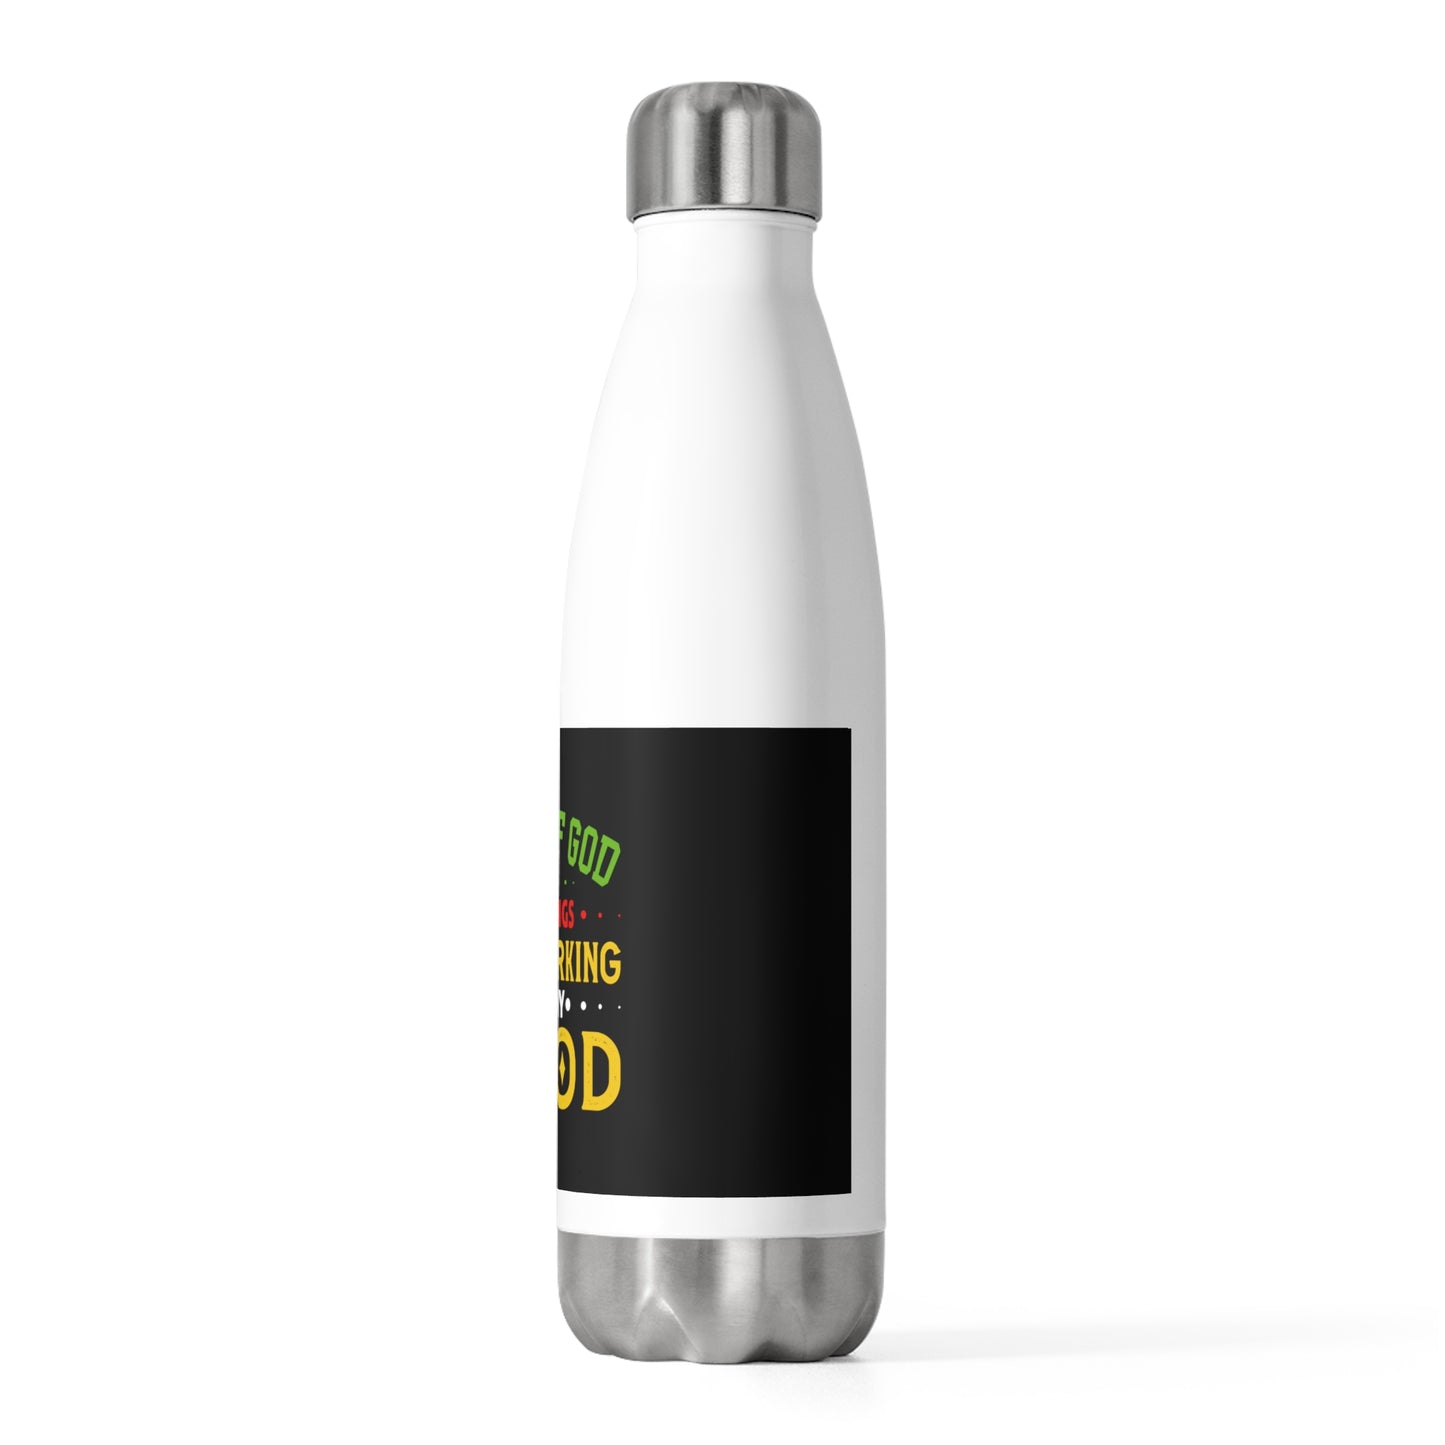 Child Of God All Things Are Working For My Good Insulated Bottle Printify